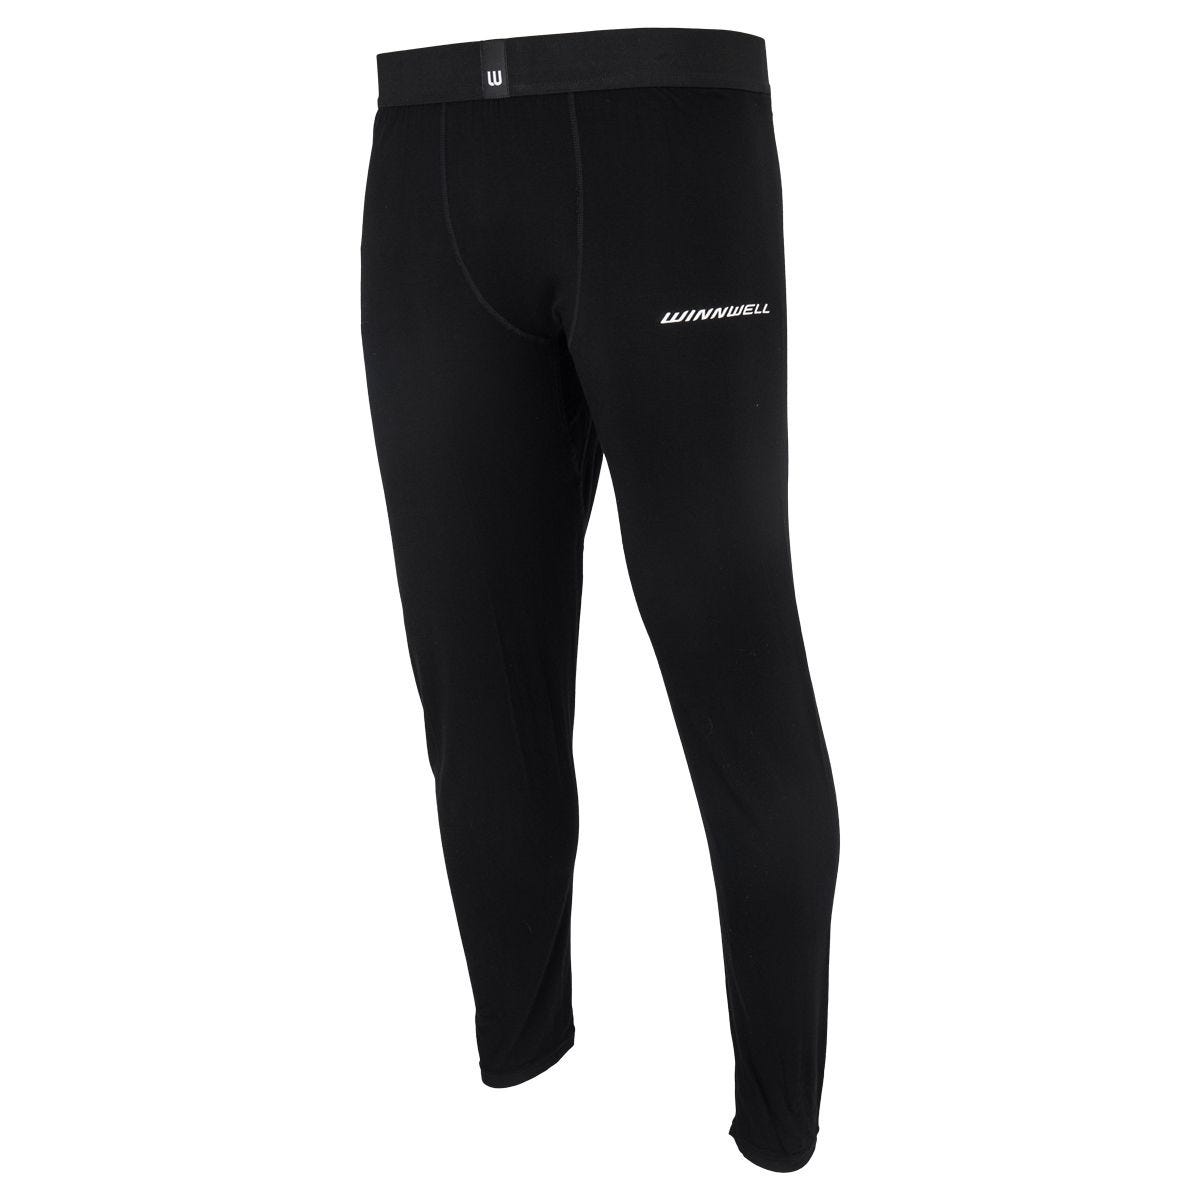 Under Armour Youth Hockey Pant